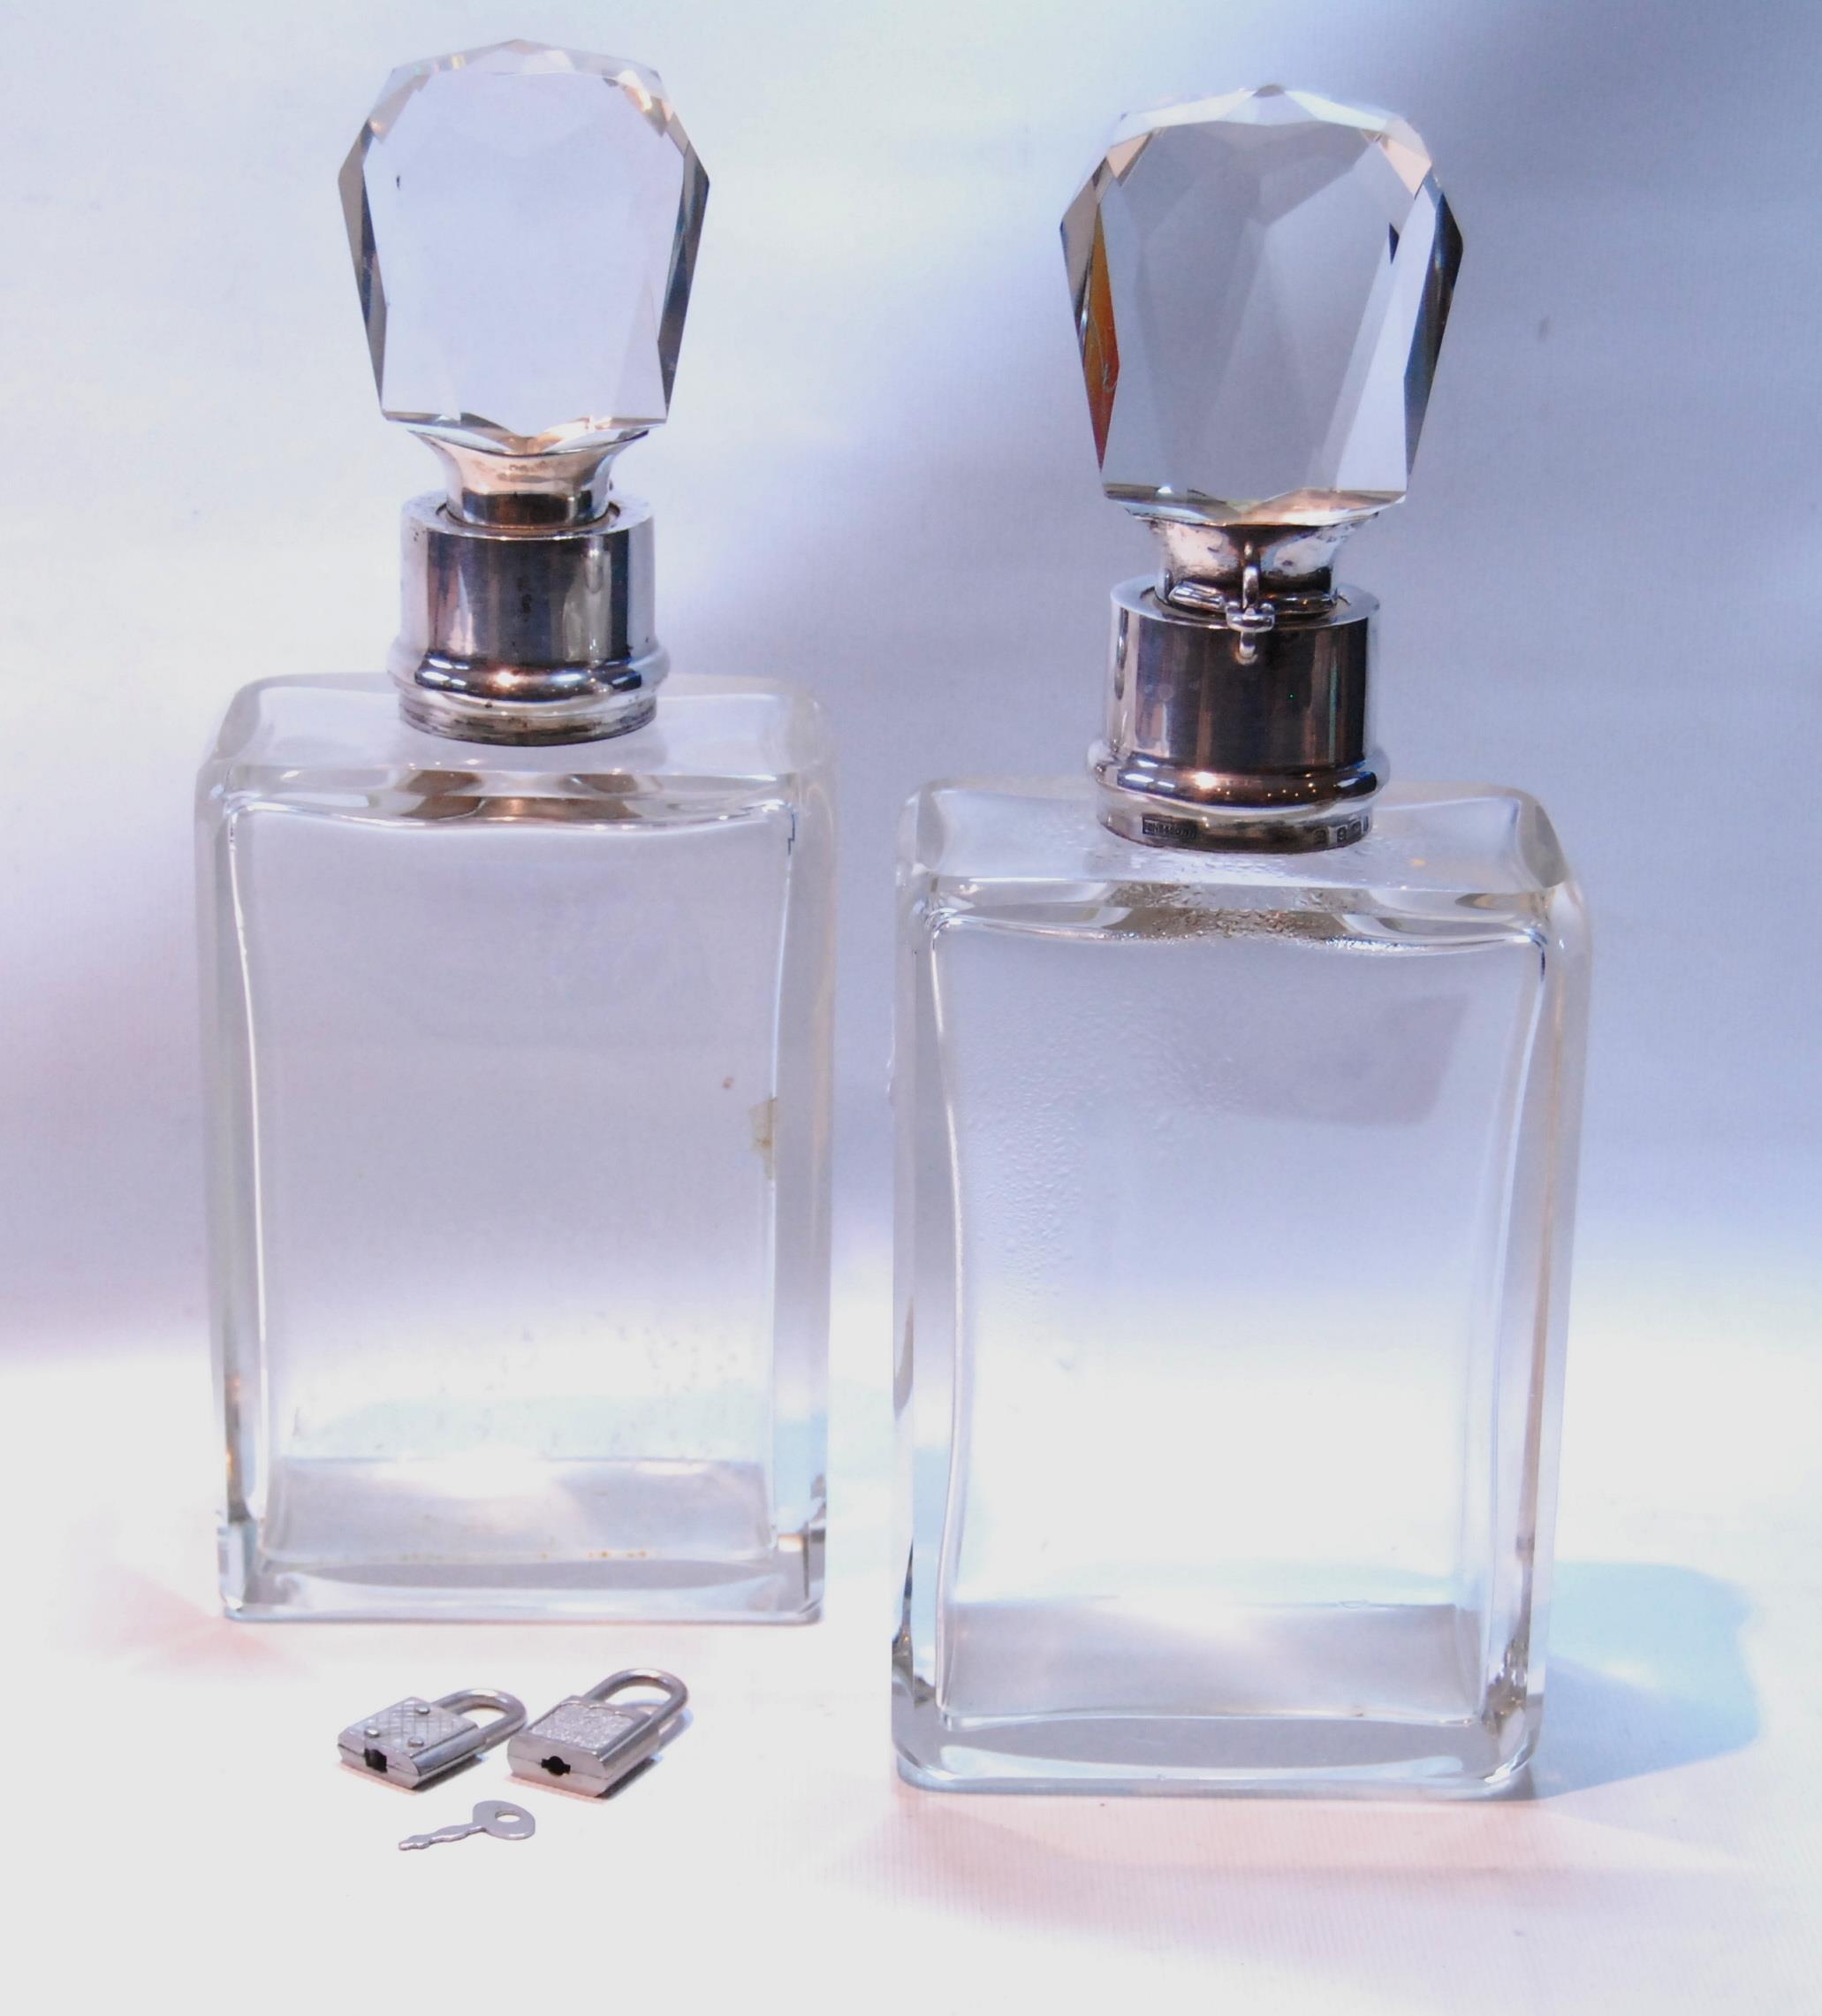 Pair of Edwardian heavy cut glass lockable spirit decanters, plain rectangular, with faceted